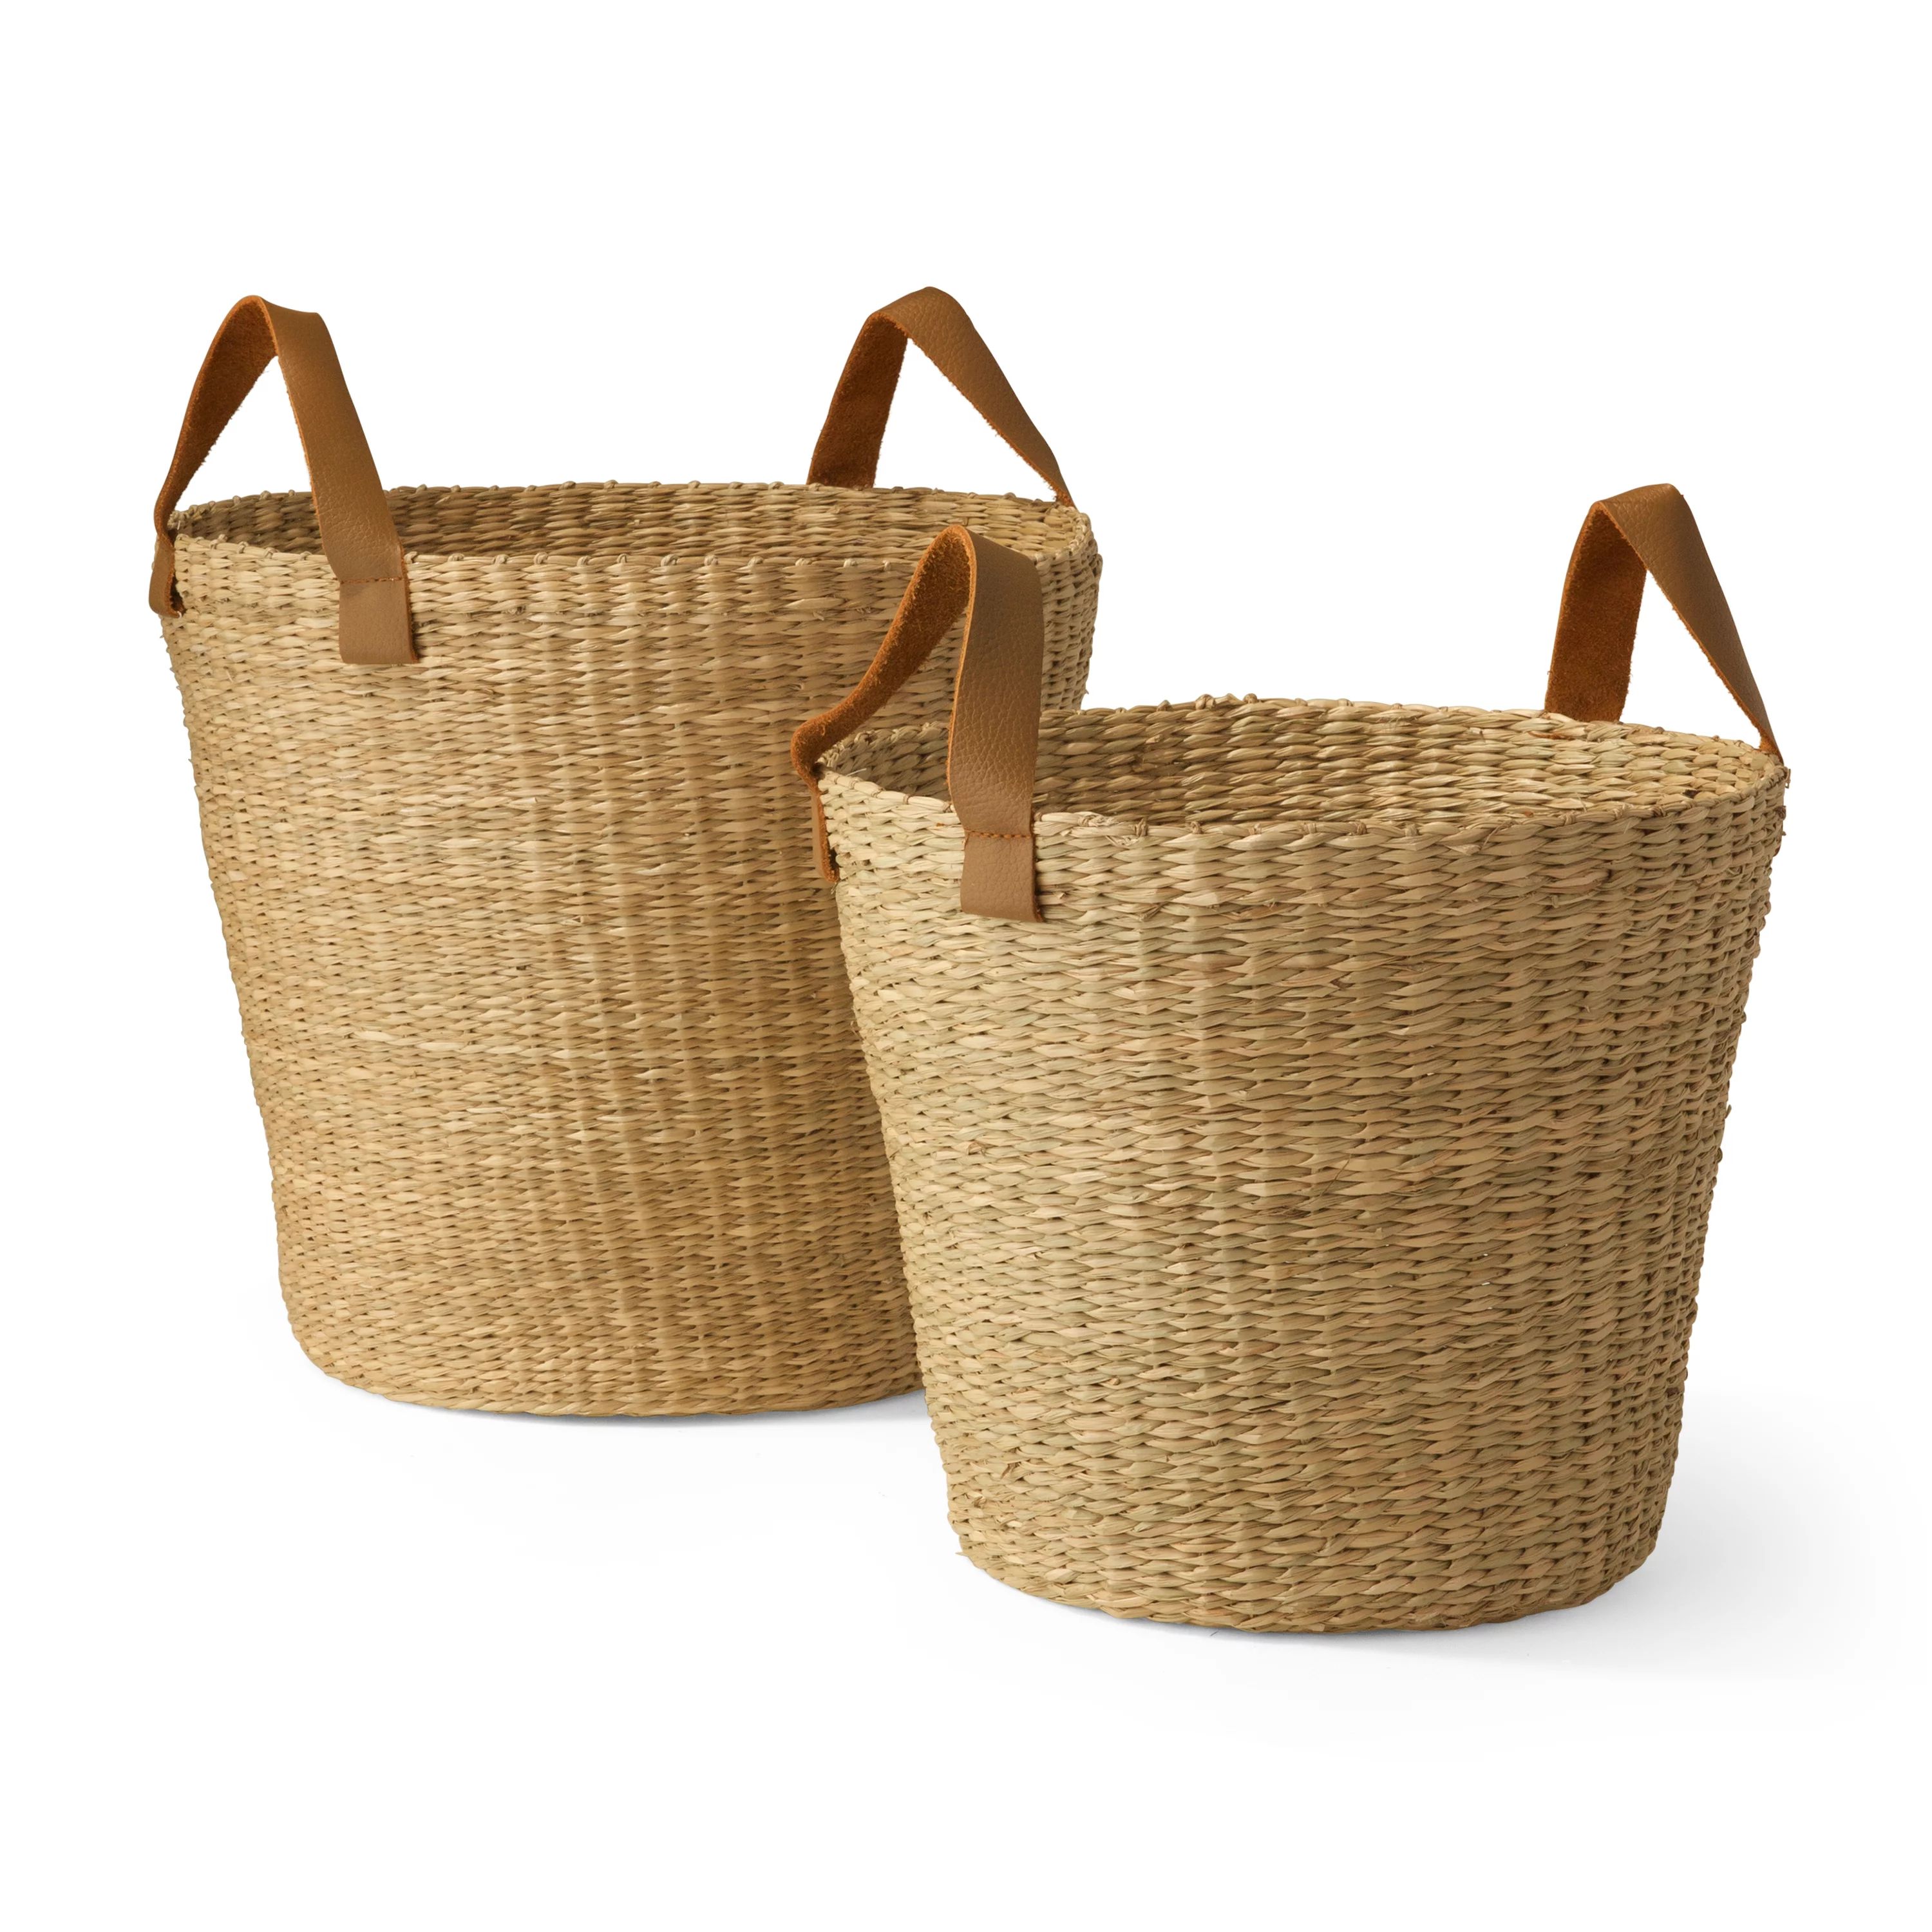 MoDRN Naturals Floppy Seagrass Basket with Leather Handles, Round Tapered, Set of 2 | Walmart (US)